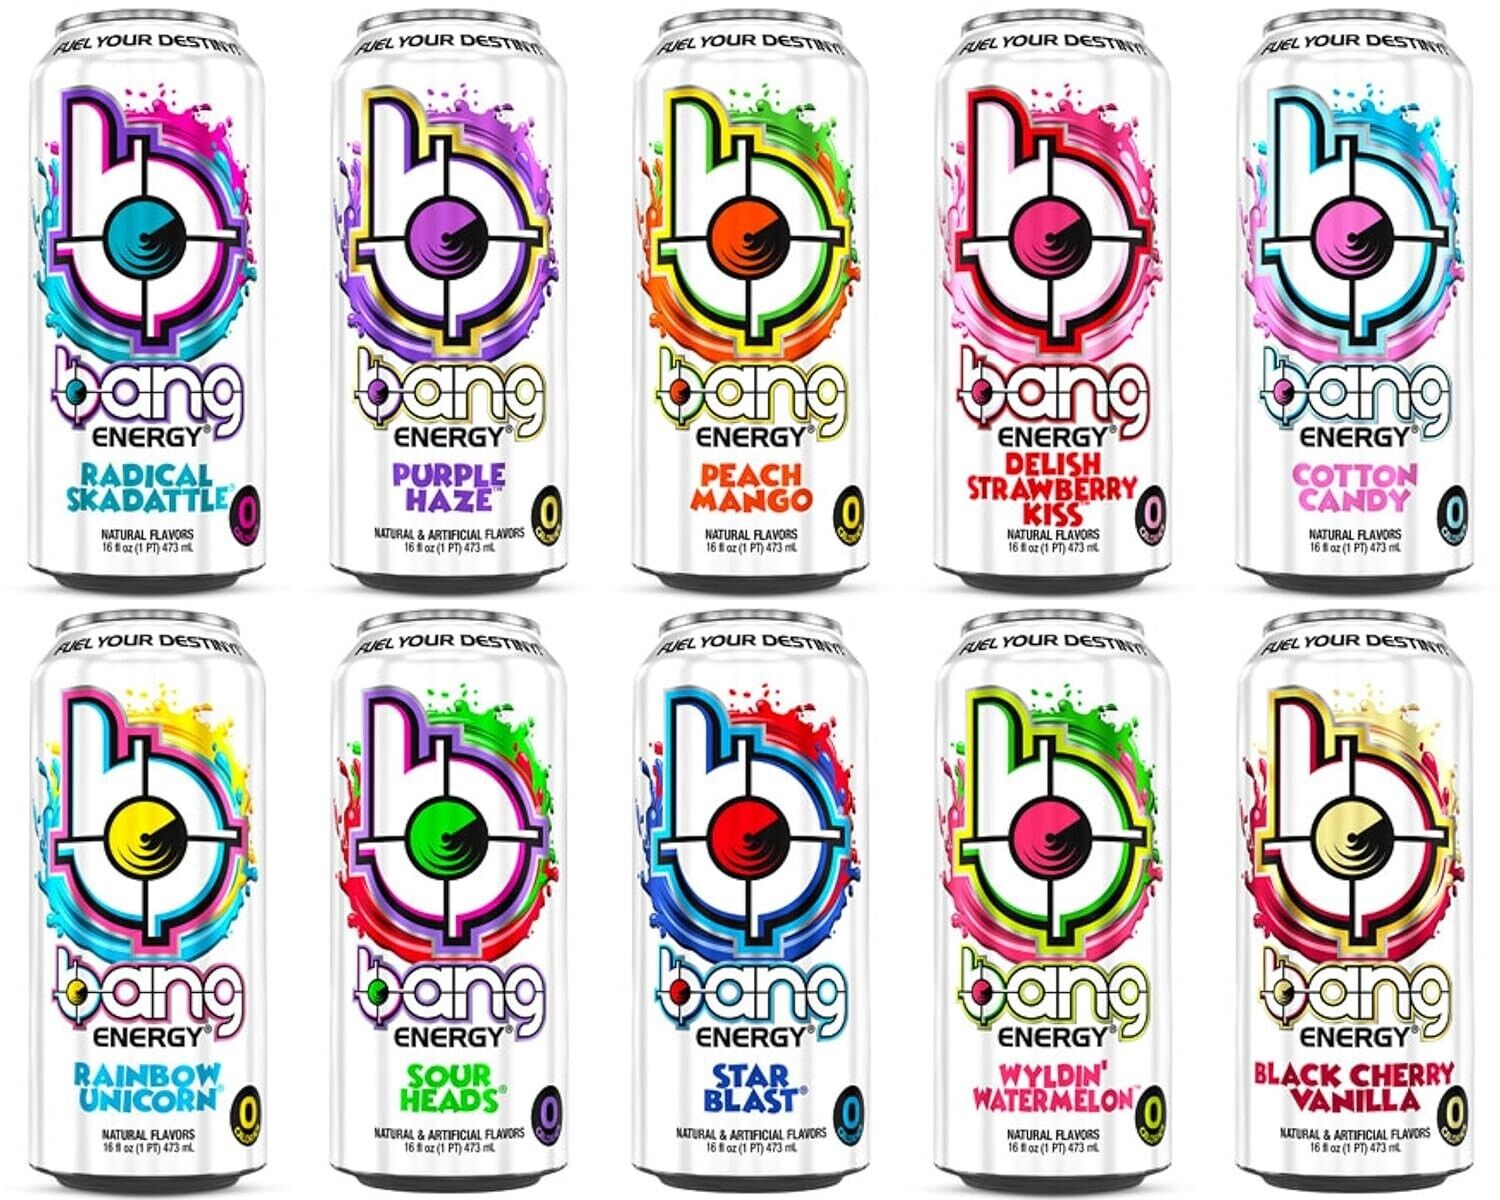 Bang Energy, Rainbow Unicorn Variety Pack, 16 Fl Oz Cans, (Pack of 12)